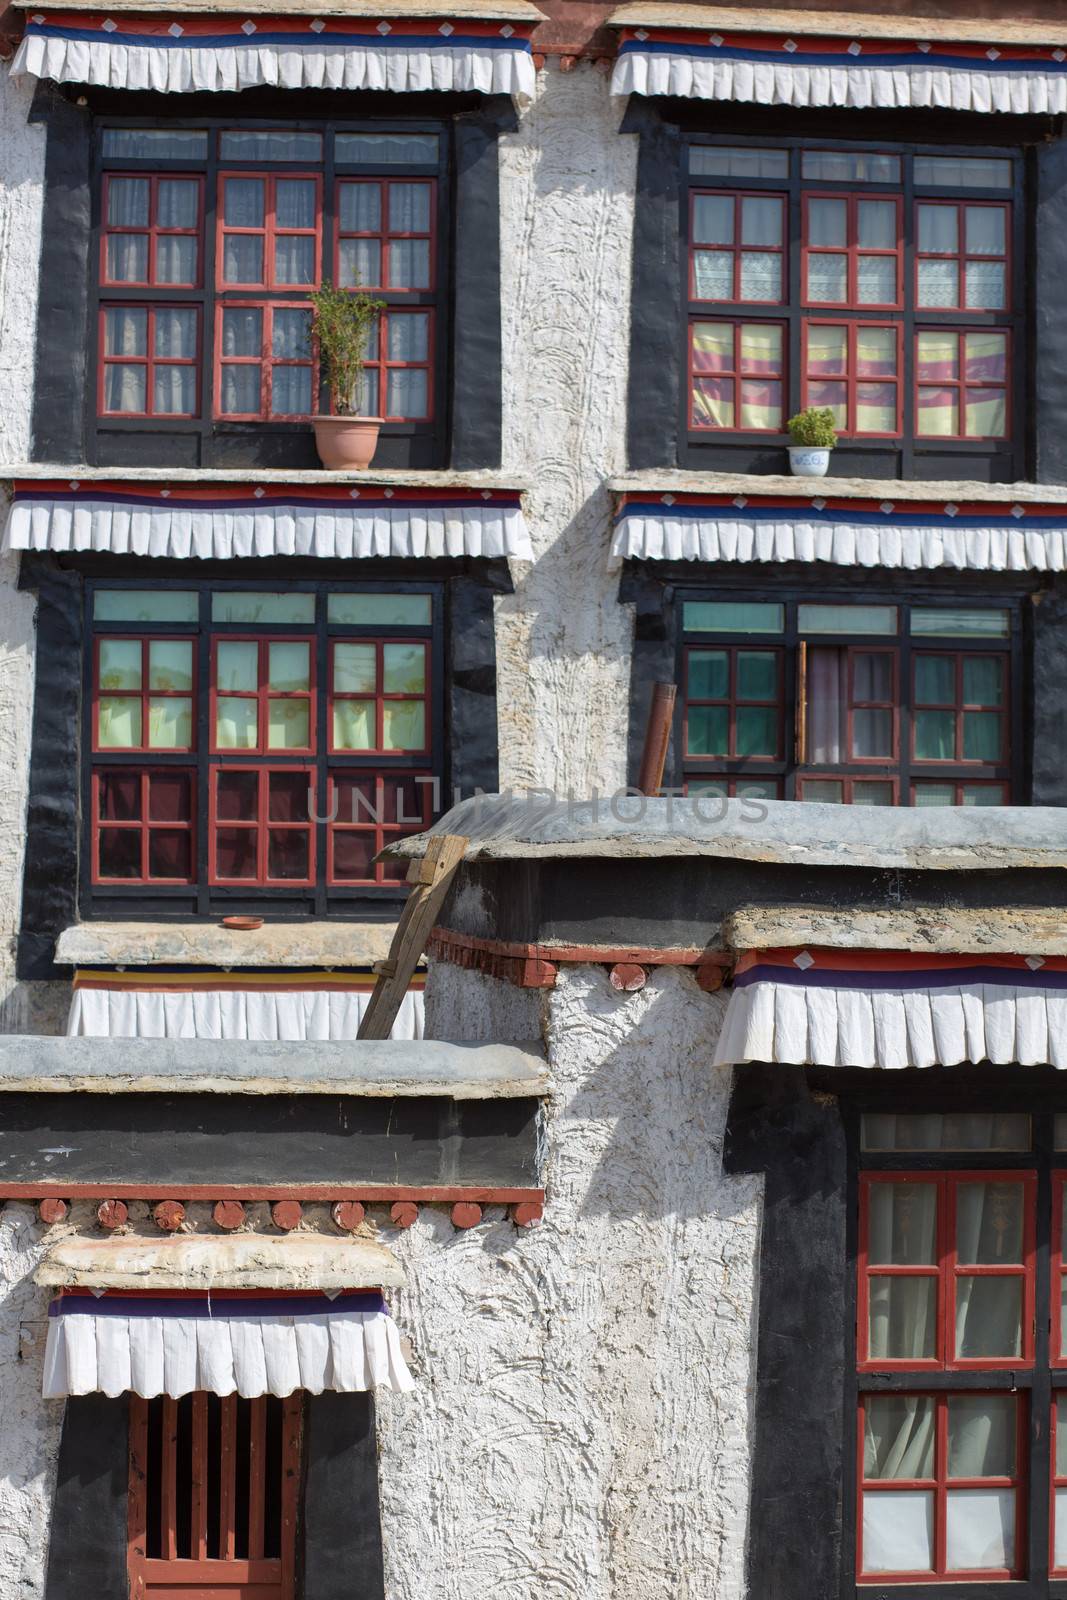 Details of the traditional Tibetan temple: The Palkhor Monastery by watchtheworld